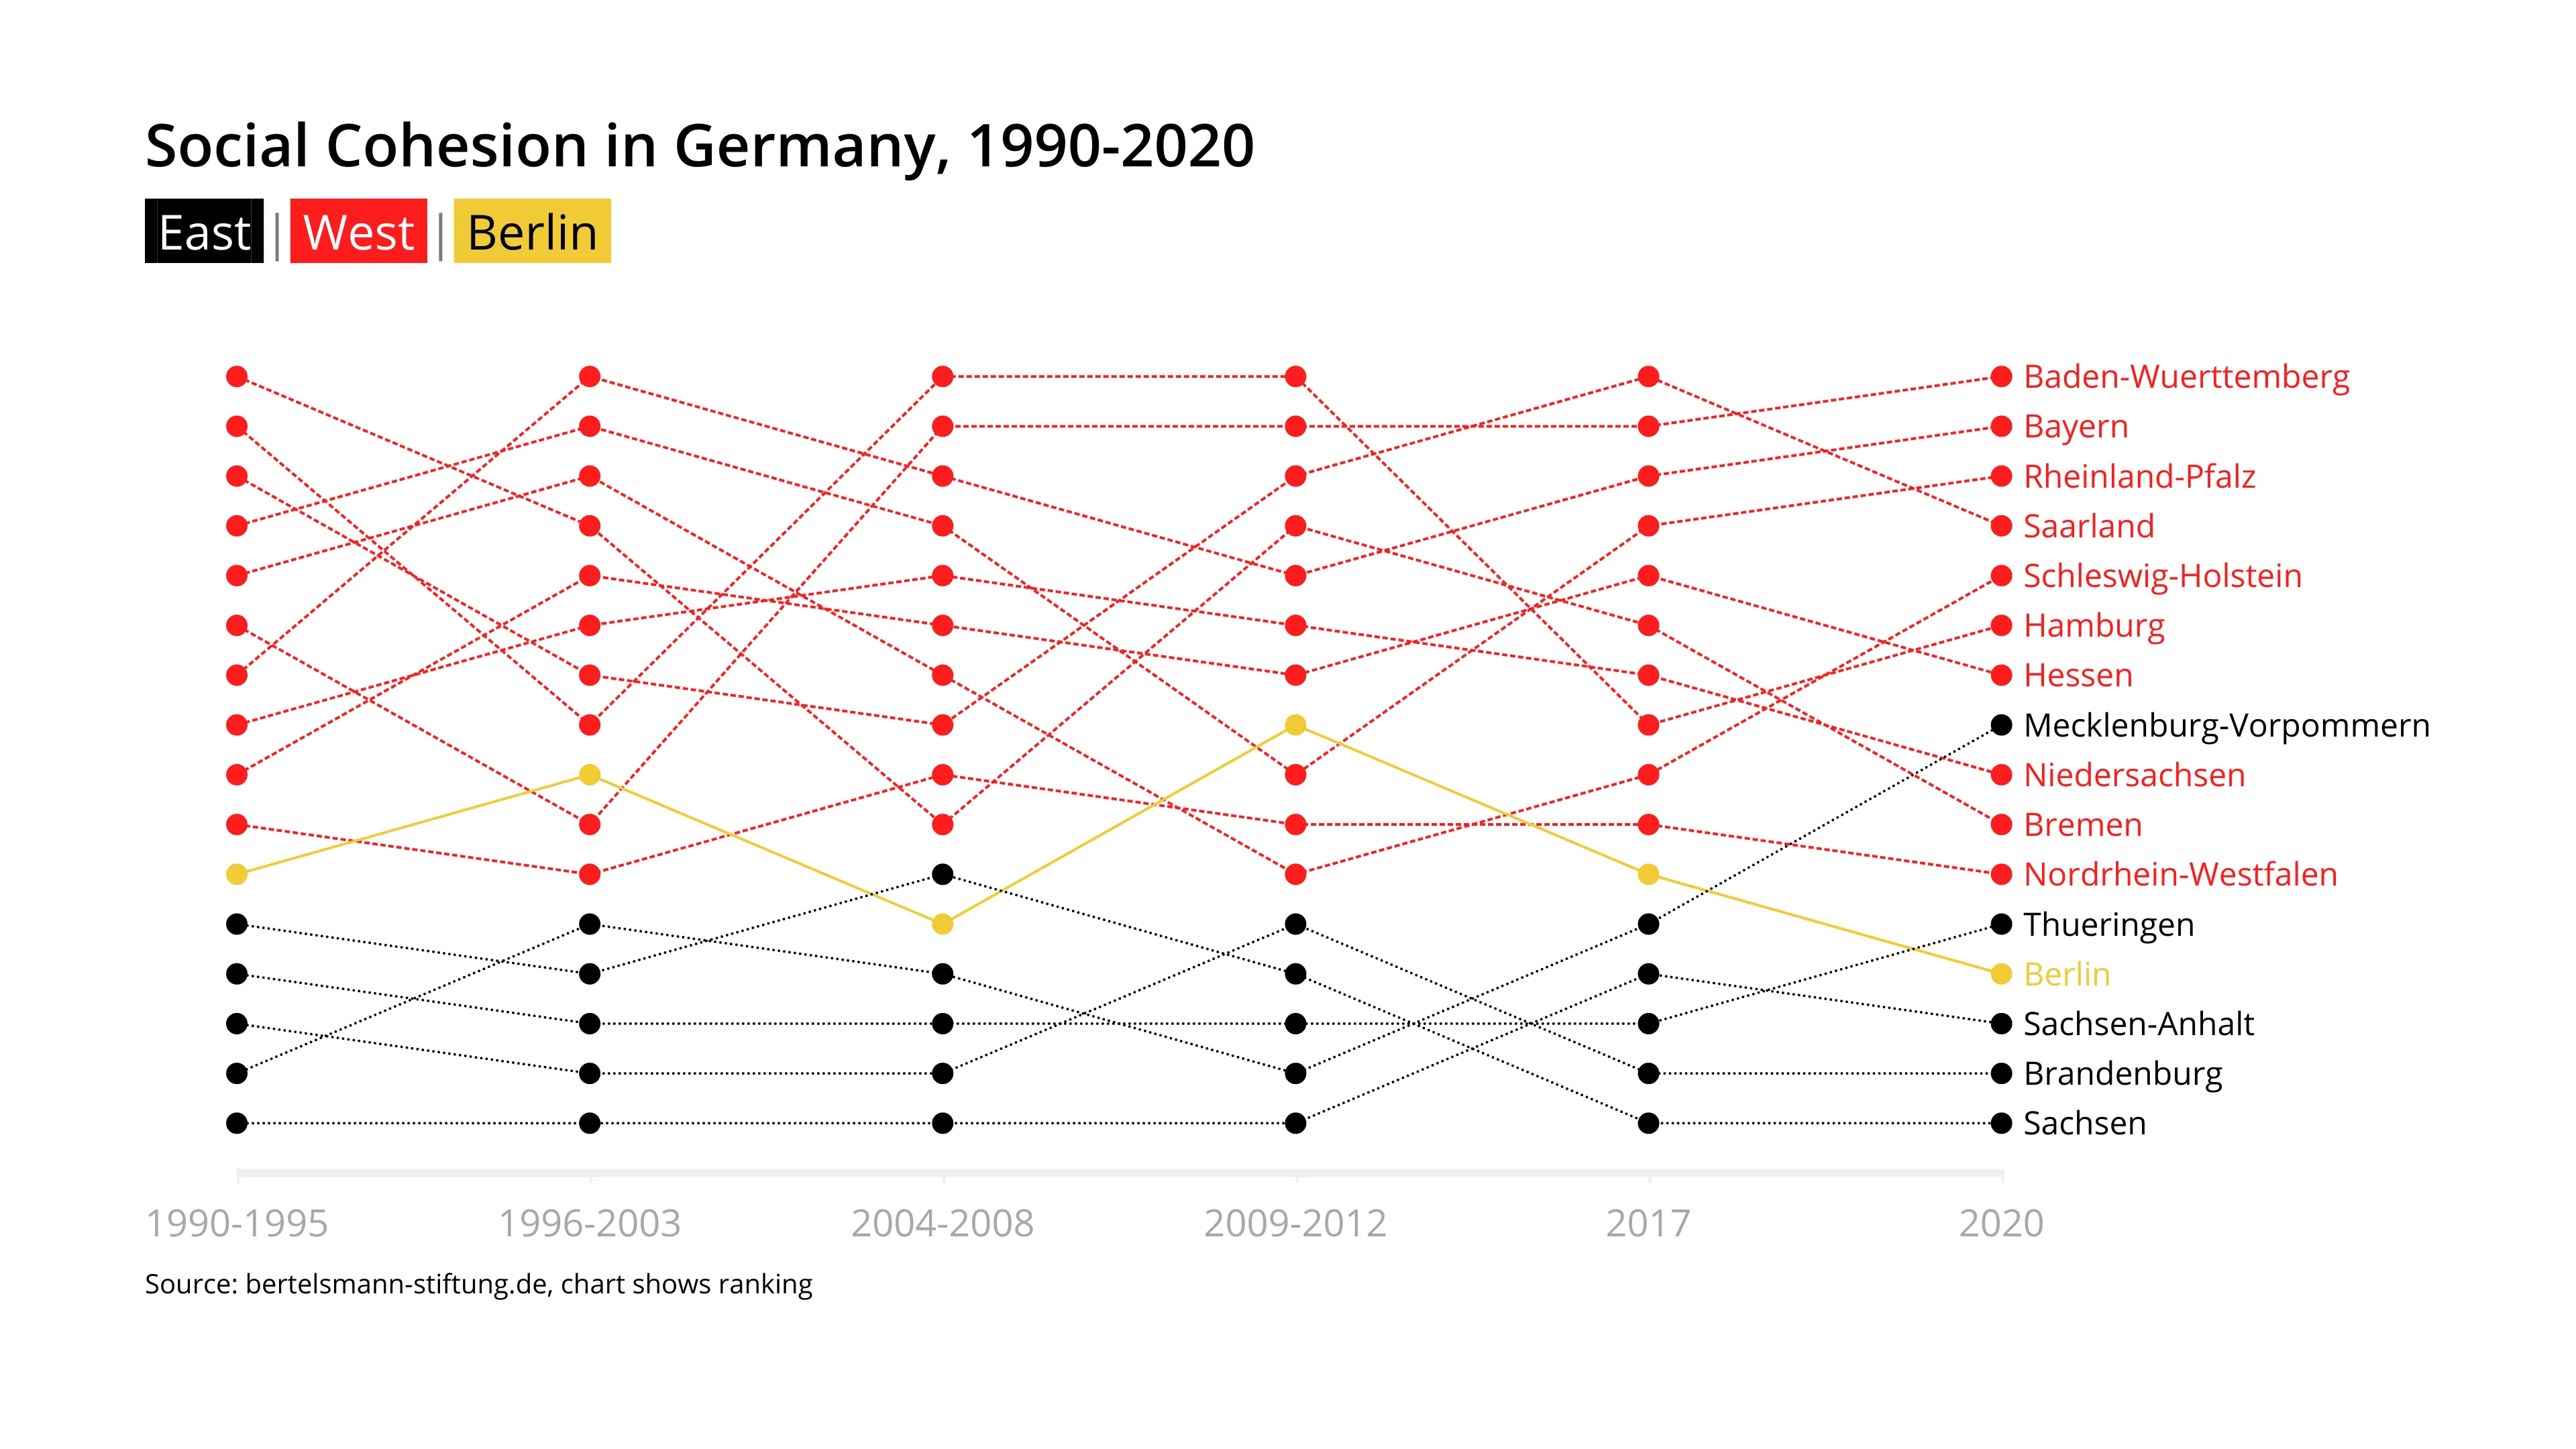 Social Cohesion in Germany, 1990-2020